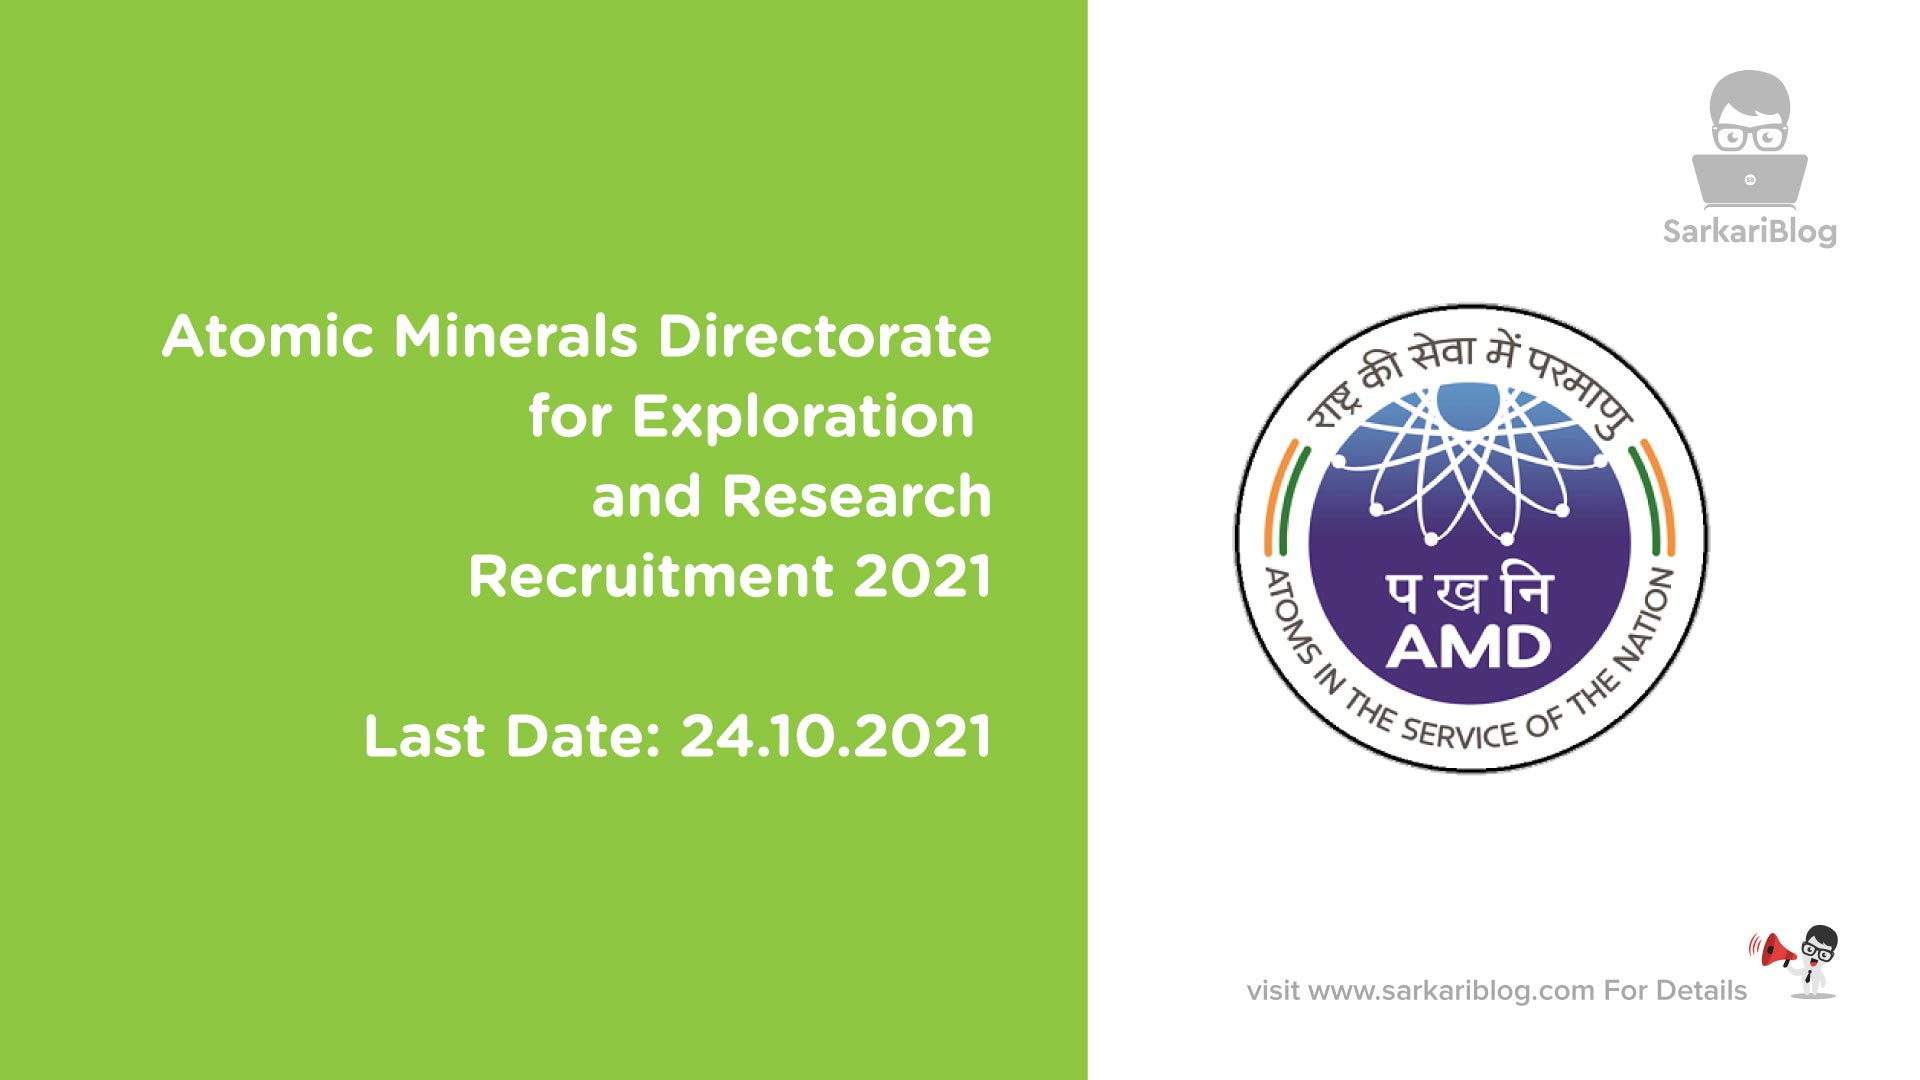 Atomic Minerals Directorate for Exploration and Research Recruitment 2021